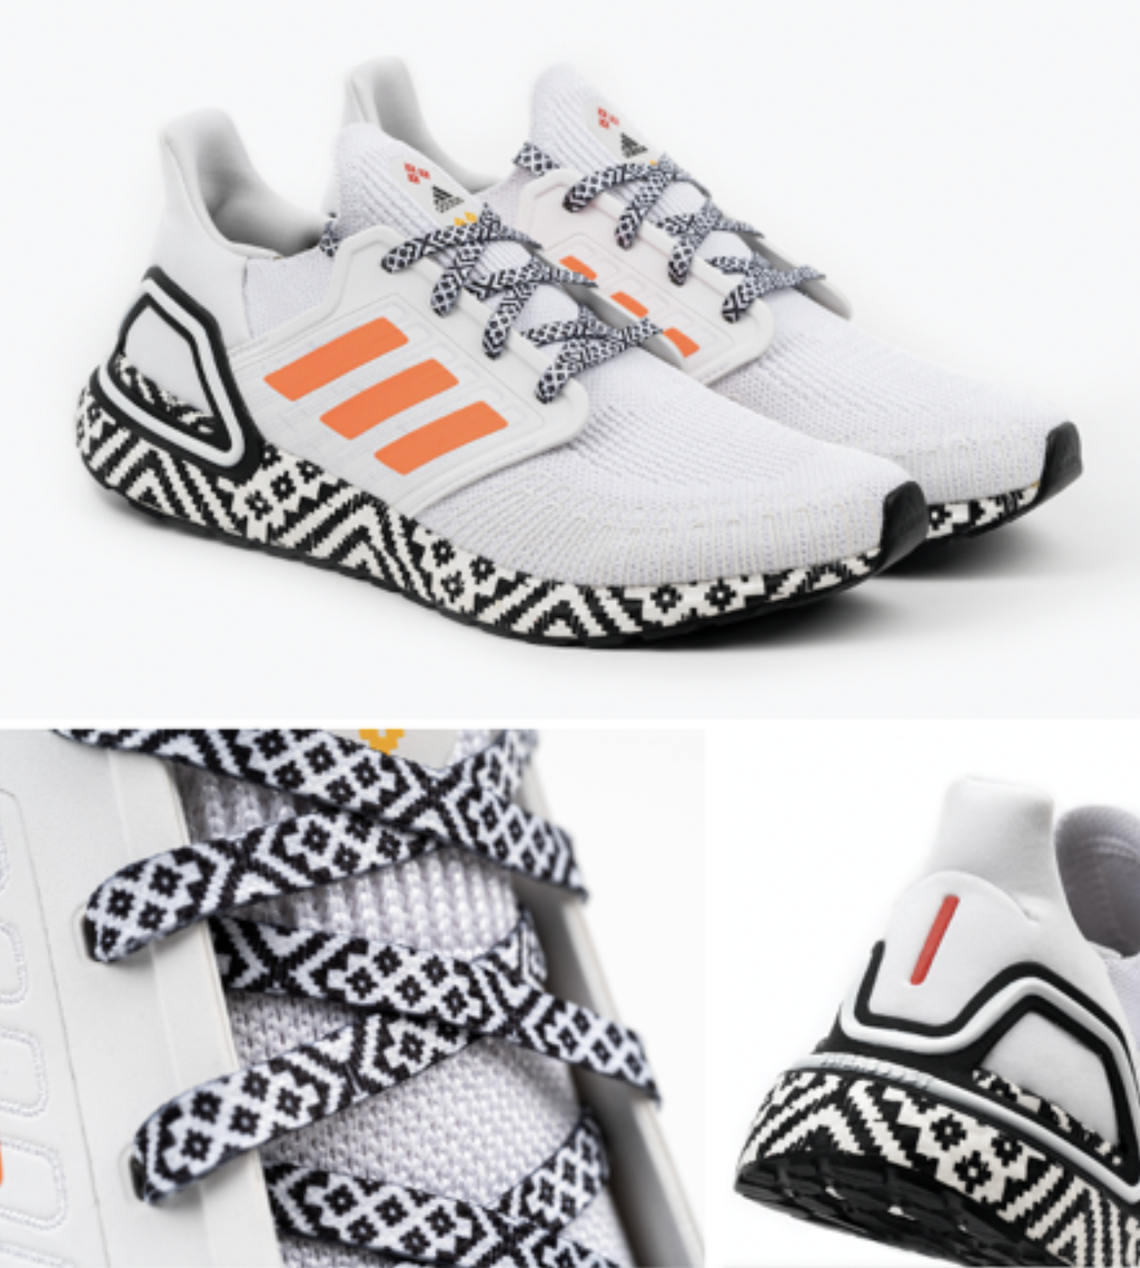 Adidas Ultraboost Dna City Pack Southeast Asia 2021 5